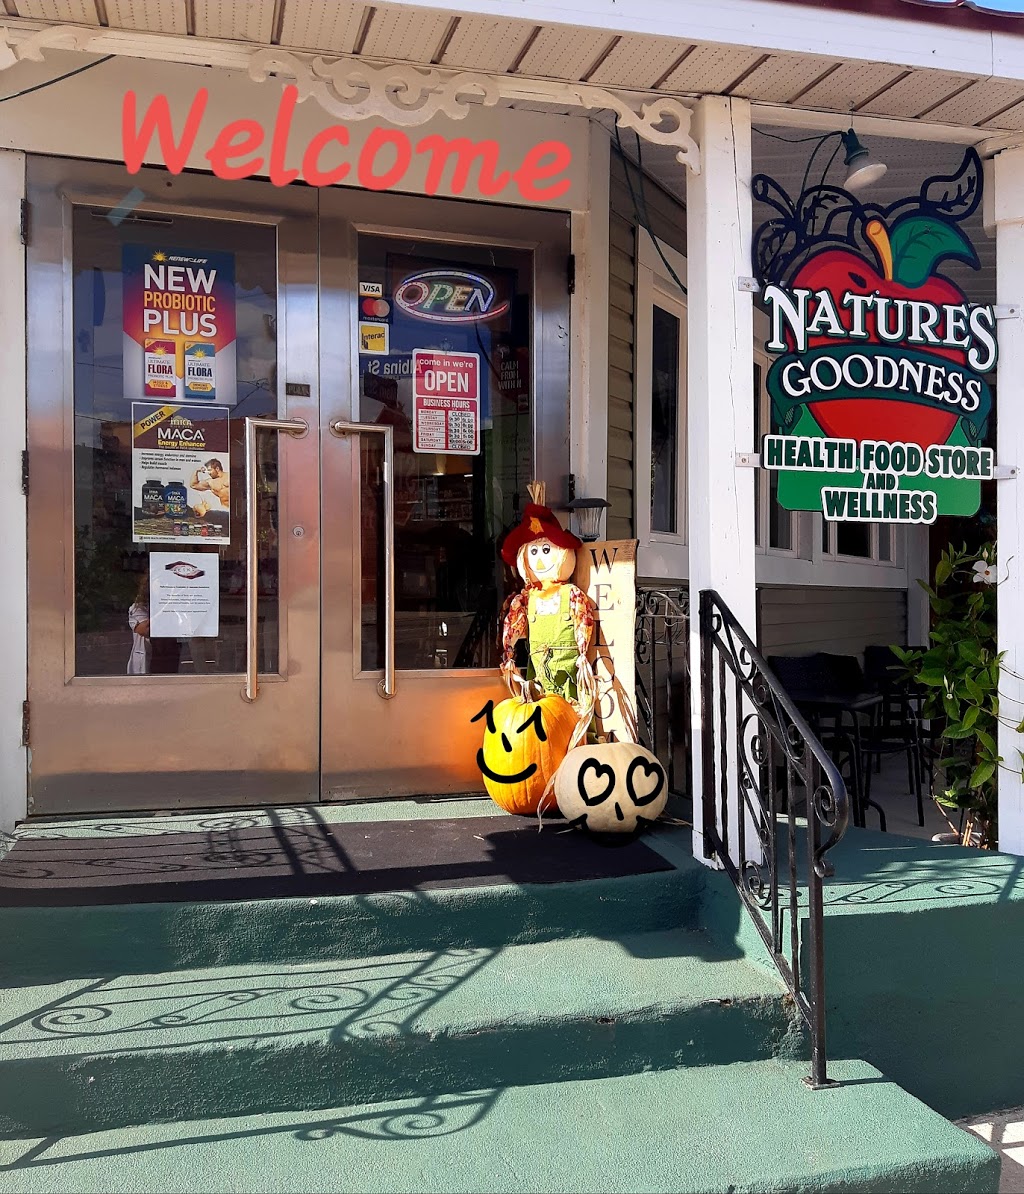 Natures Goodness Health Food and Wellness | 98 W Main St, Welland, ON L3C 5A1, Canada | Phone: (905) 732-6767